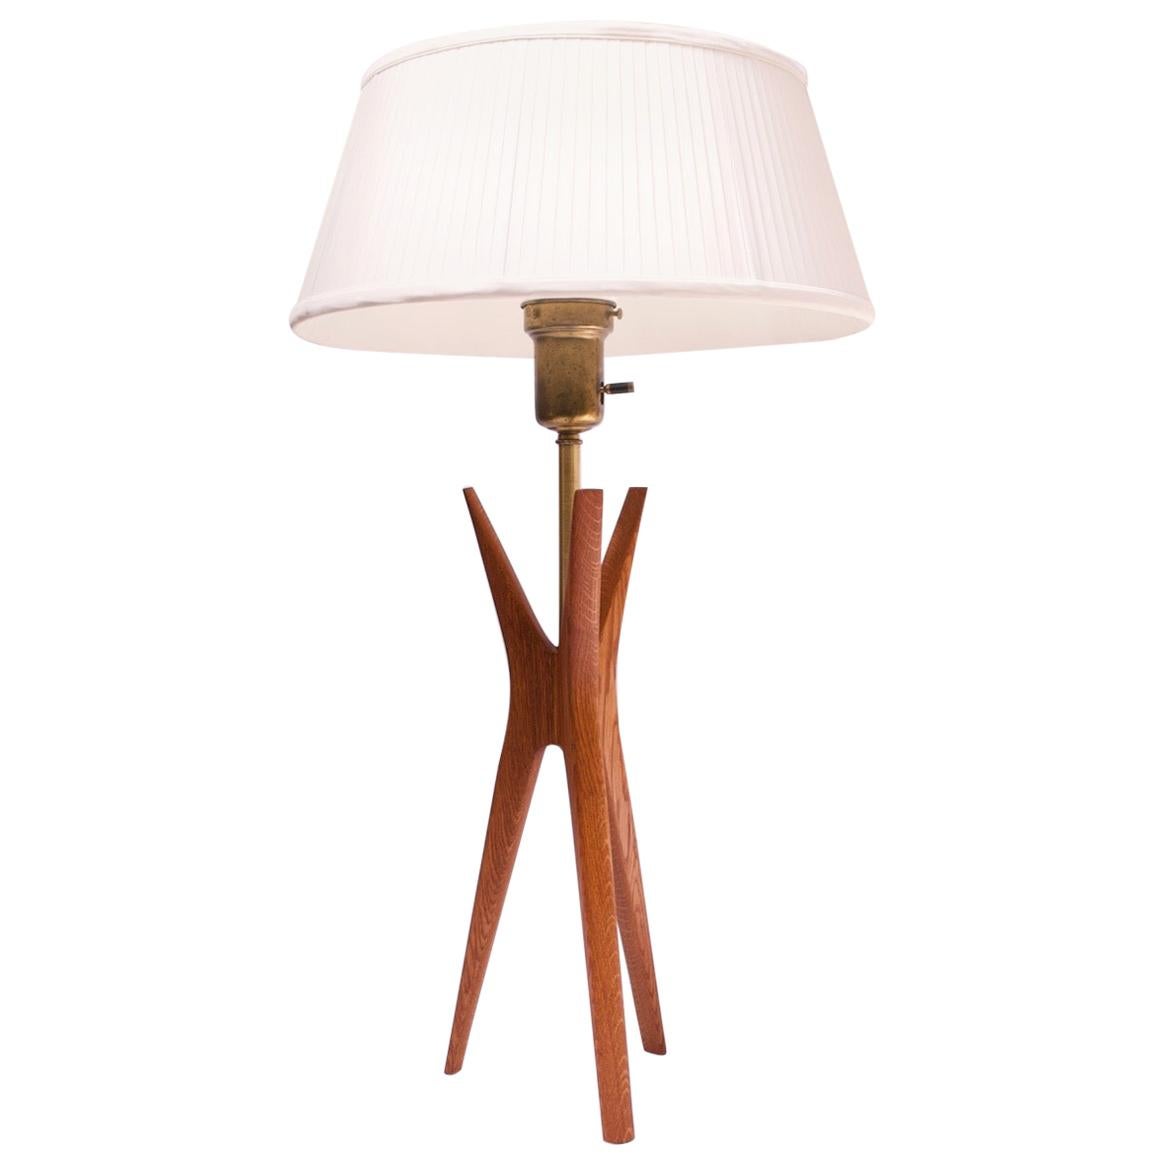 Stained Oak Tripod Table Lamp with Diffuser and Shade by Gerald Thurston